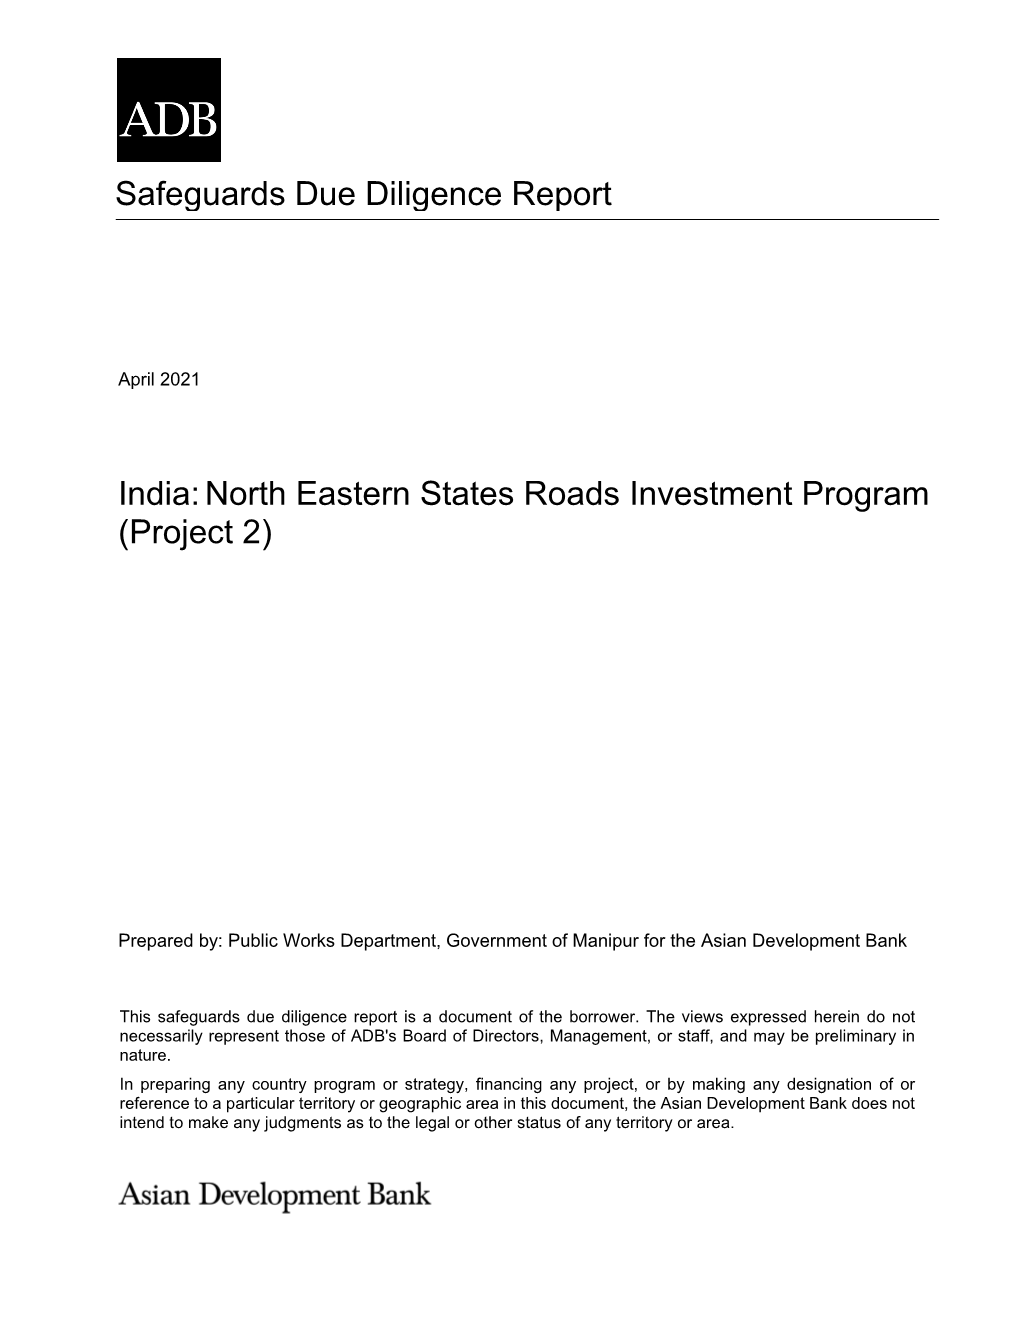 37143-033: North Eastern States Roads Investment Program (Project